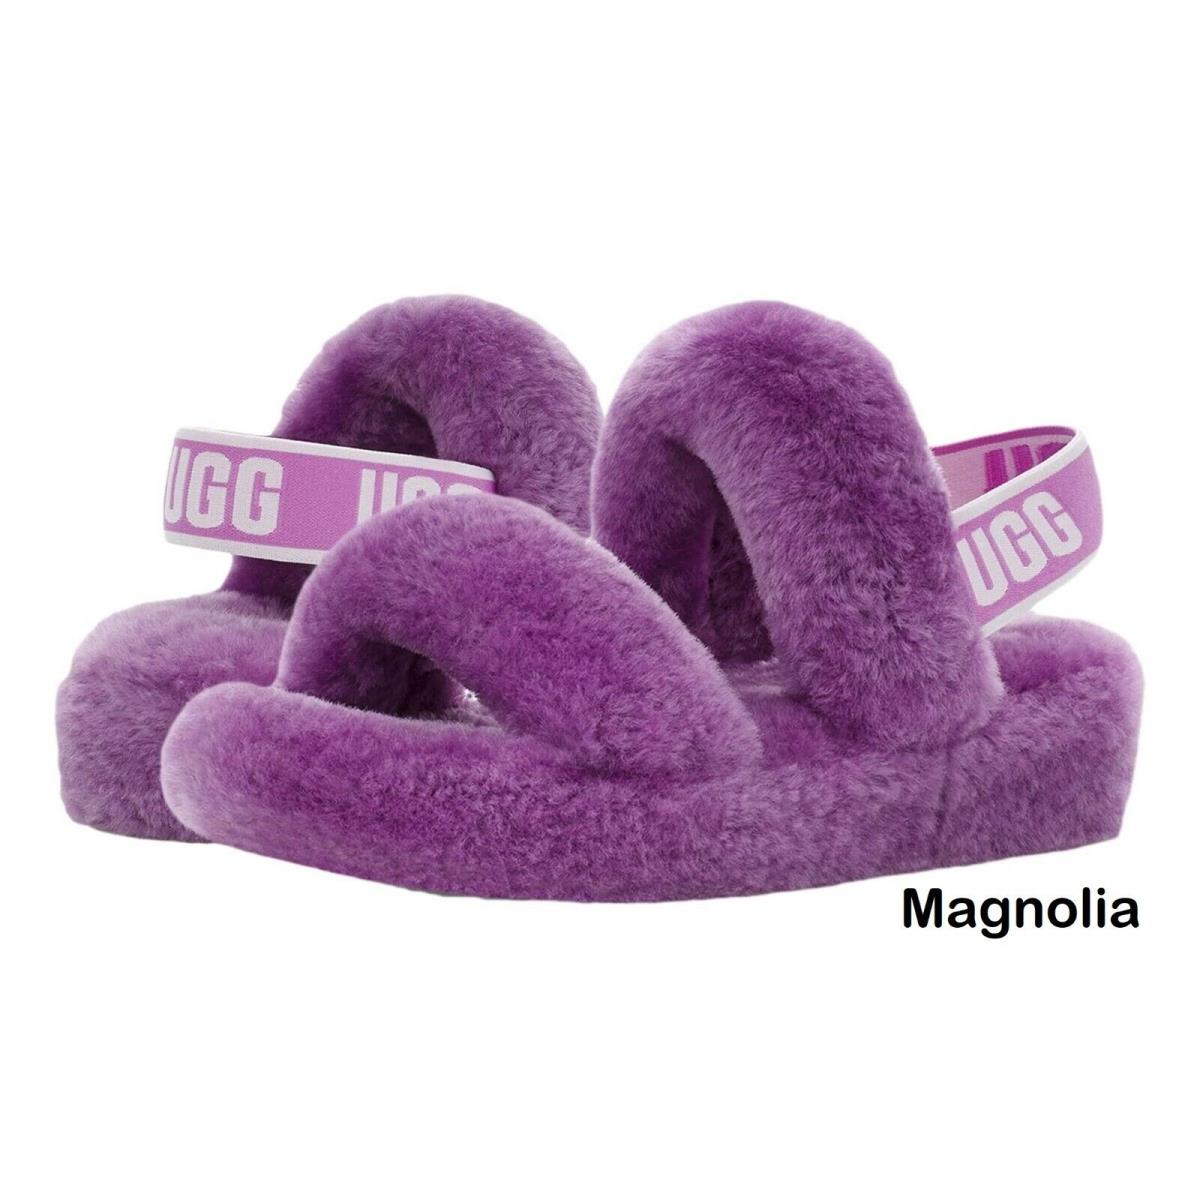 Ugg Women`s Shoes Sandals Oh Yeah Plushy Soft Slide Slippers Magnolia